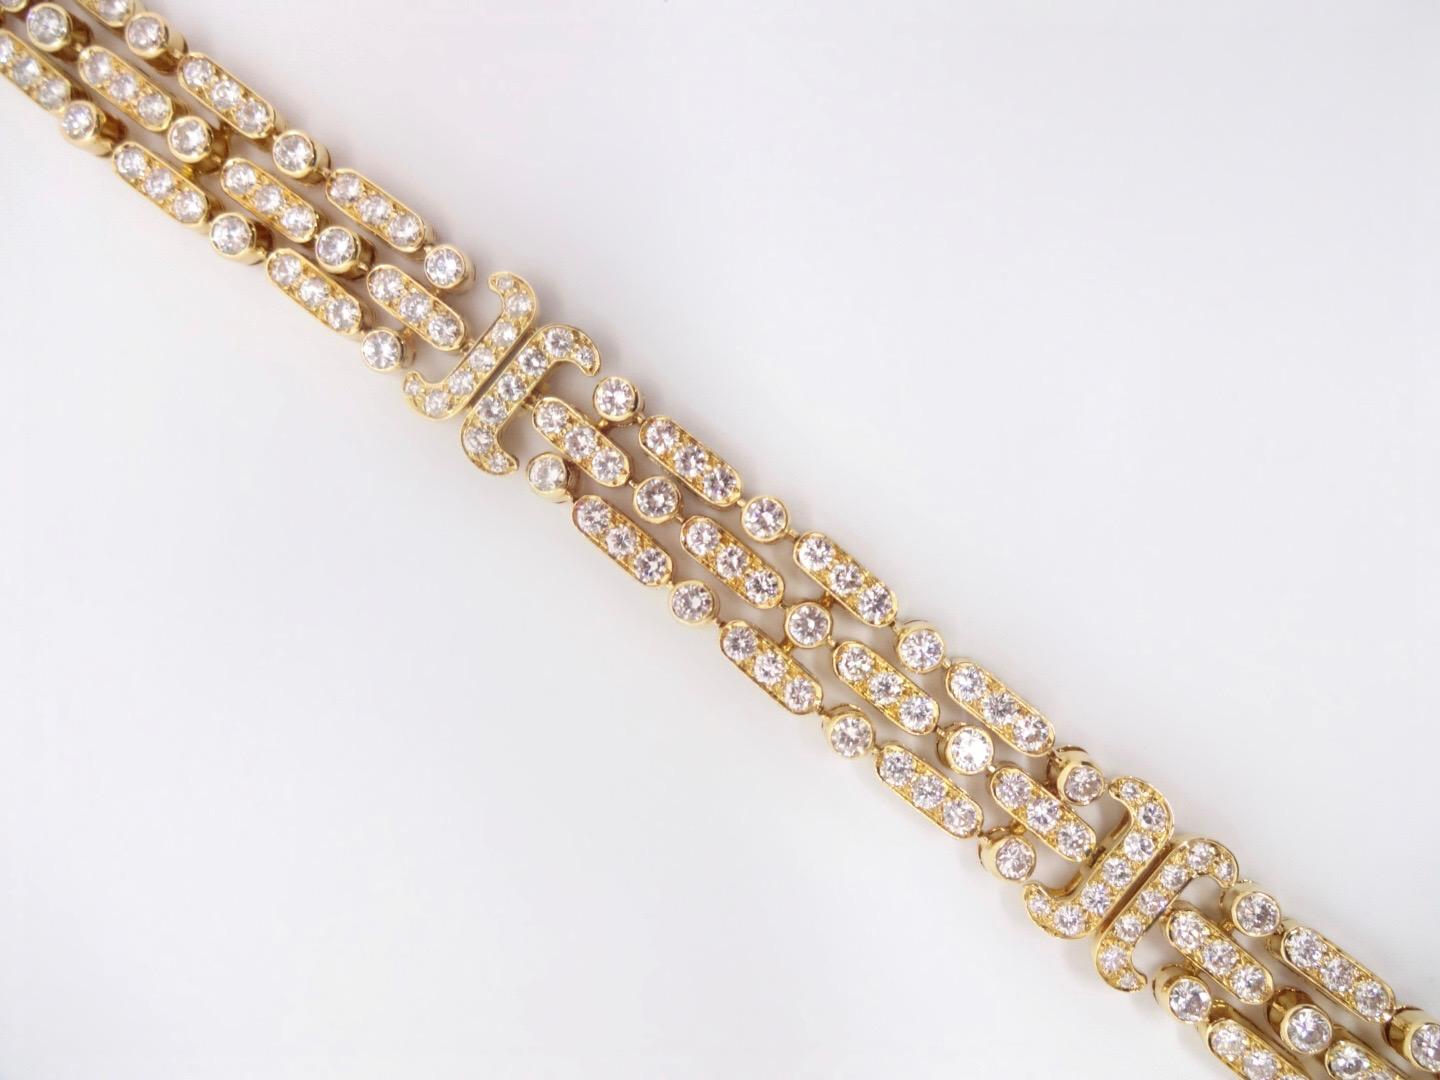 This timeless 18K yellow gold and diamond flexible bracelet by Van Cleef & Arpels has almost 9 carats of round brilliant diamonds laid out in a three row design, bracketed into three distinct sections.  It looks beautiful alone or stacked with other